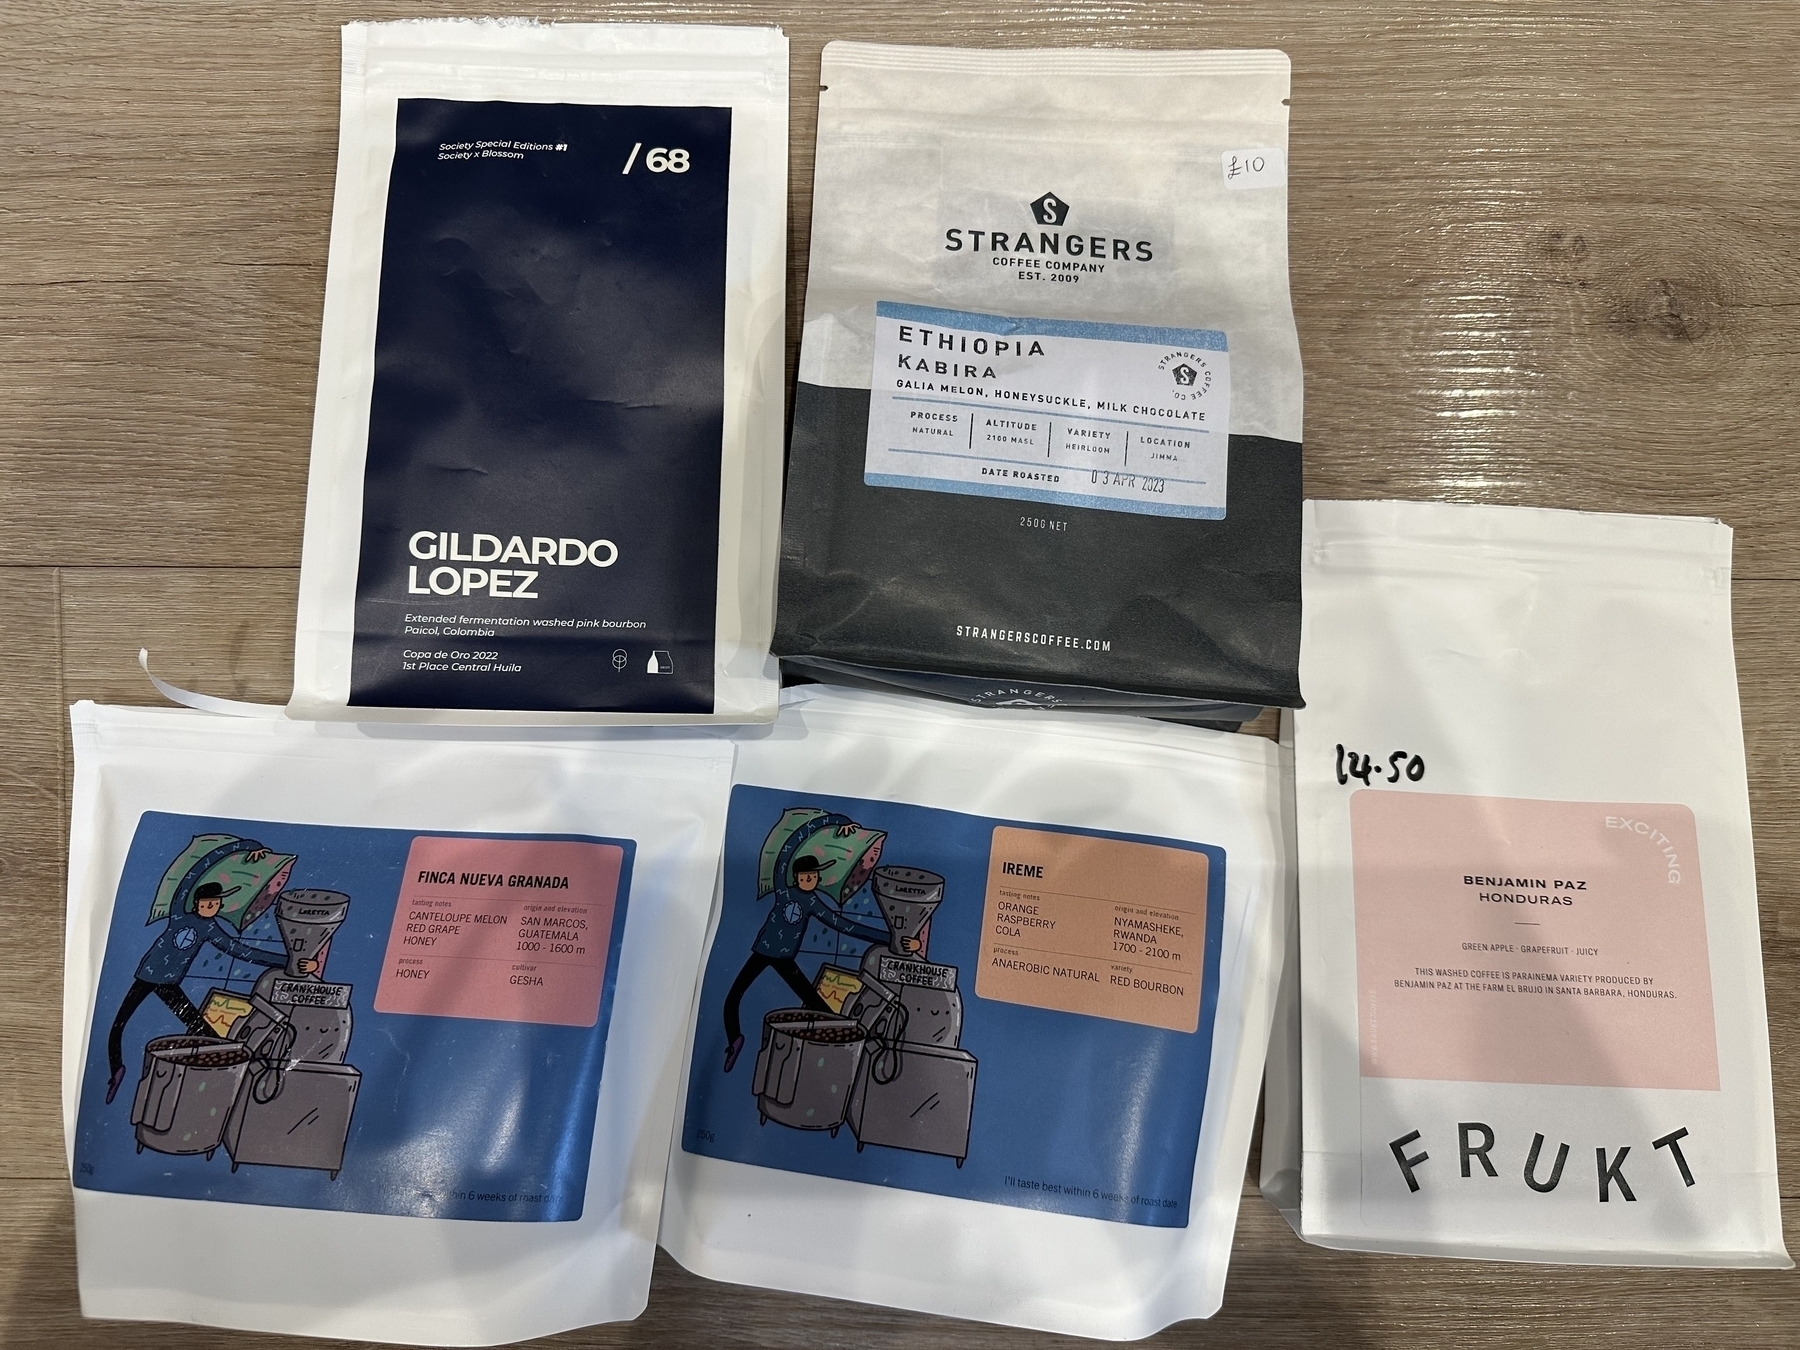 5 bags of coffee from 4 different roasters. 2 with funky illustrated labels.